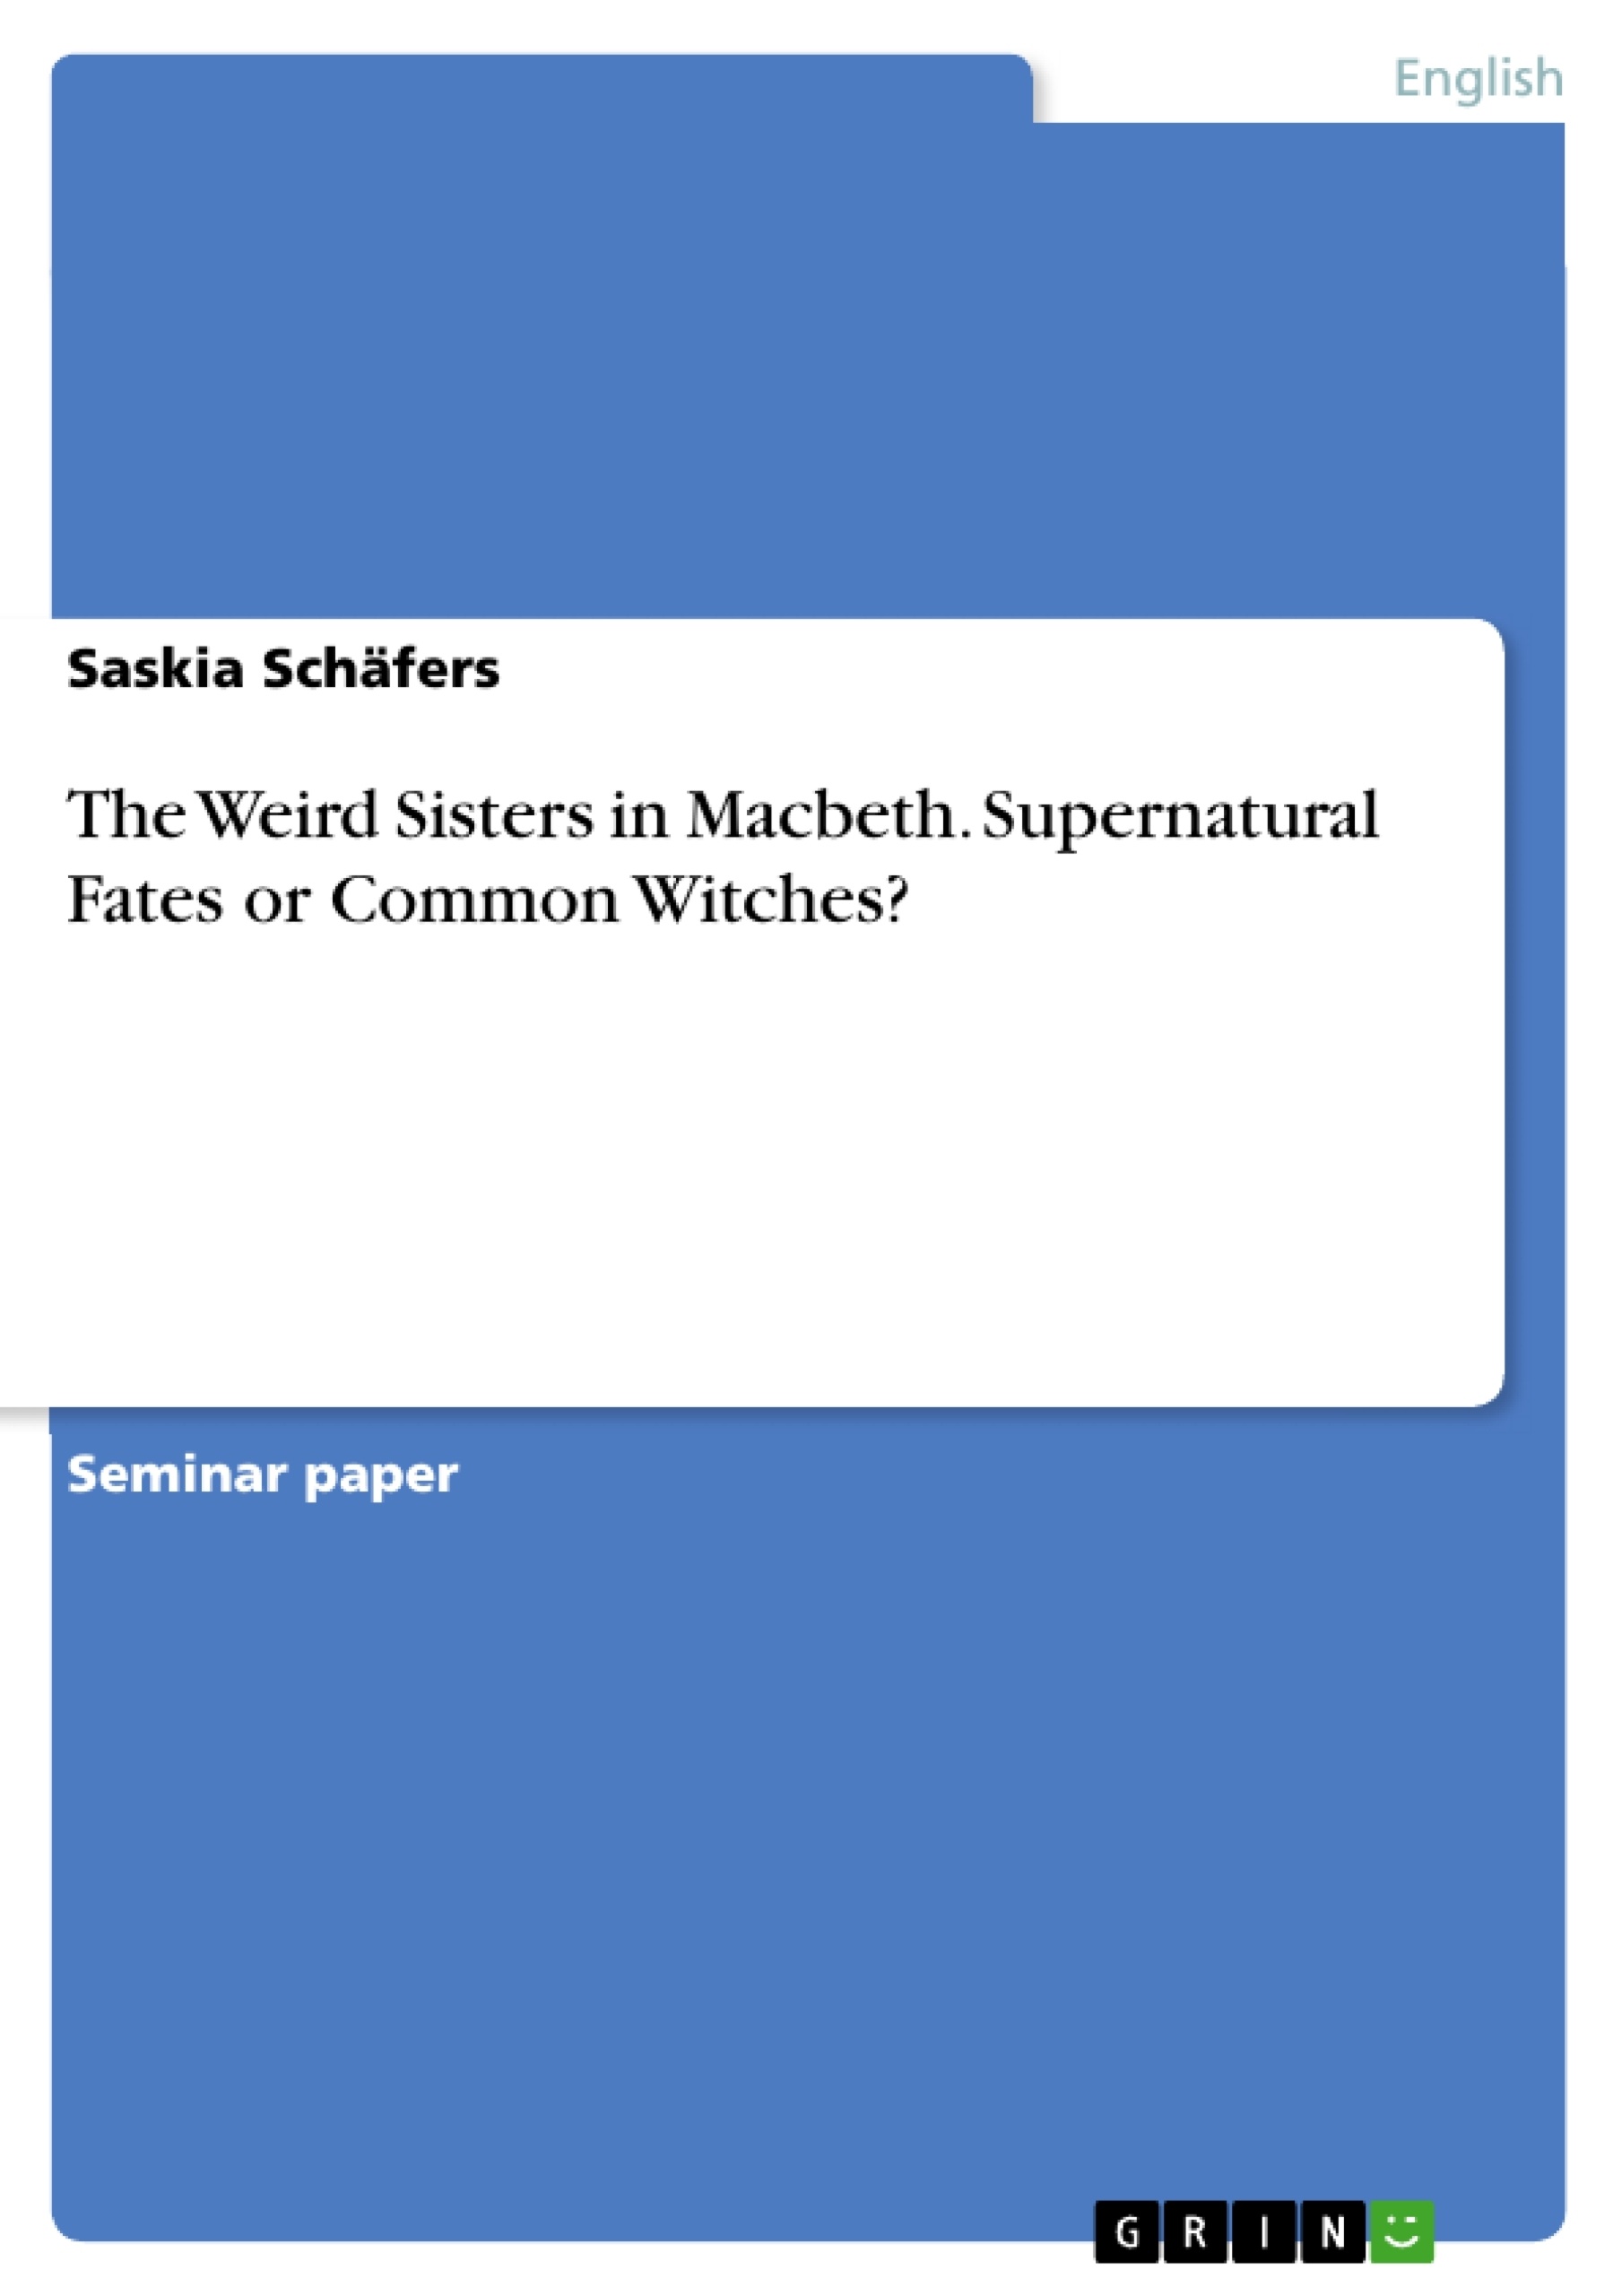 Titel: The Weird Sisters in Macbeth. Supernatural Fates or Common Witches?